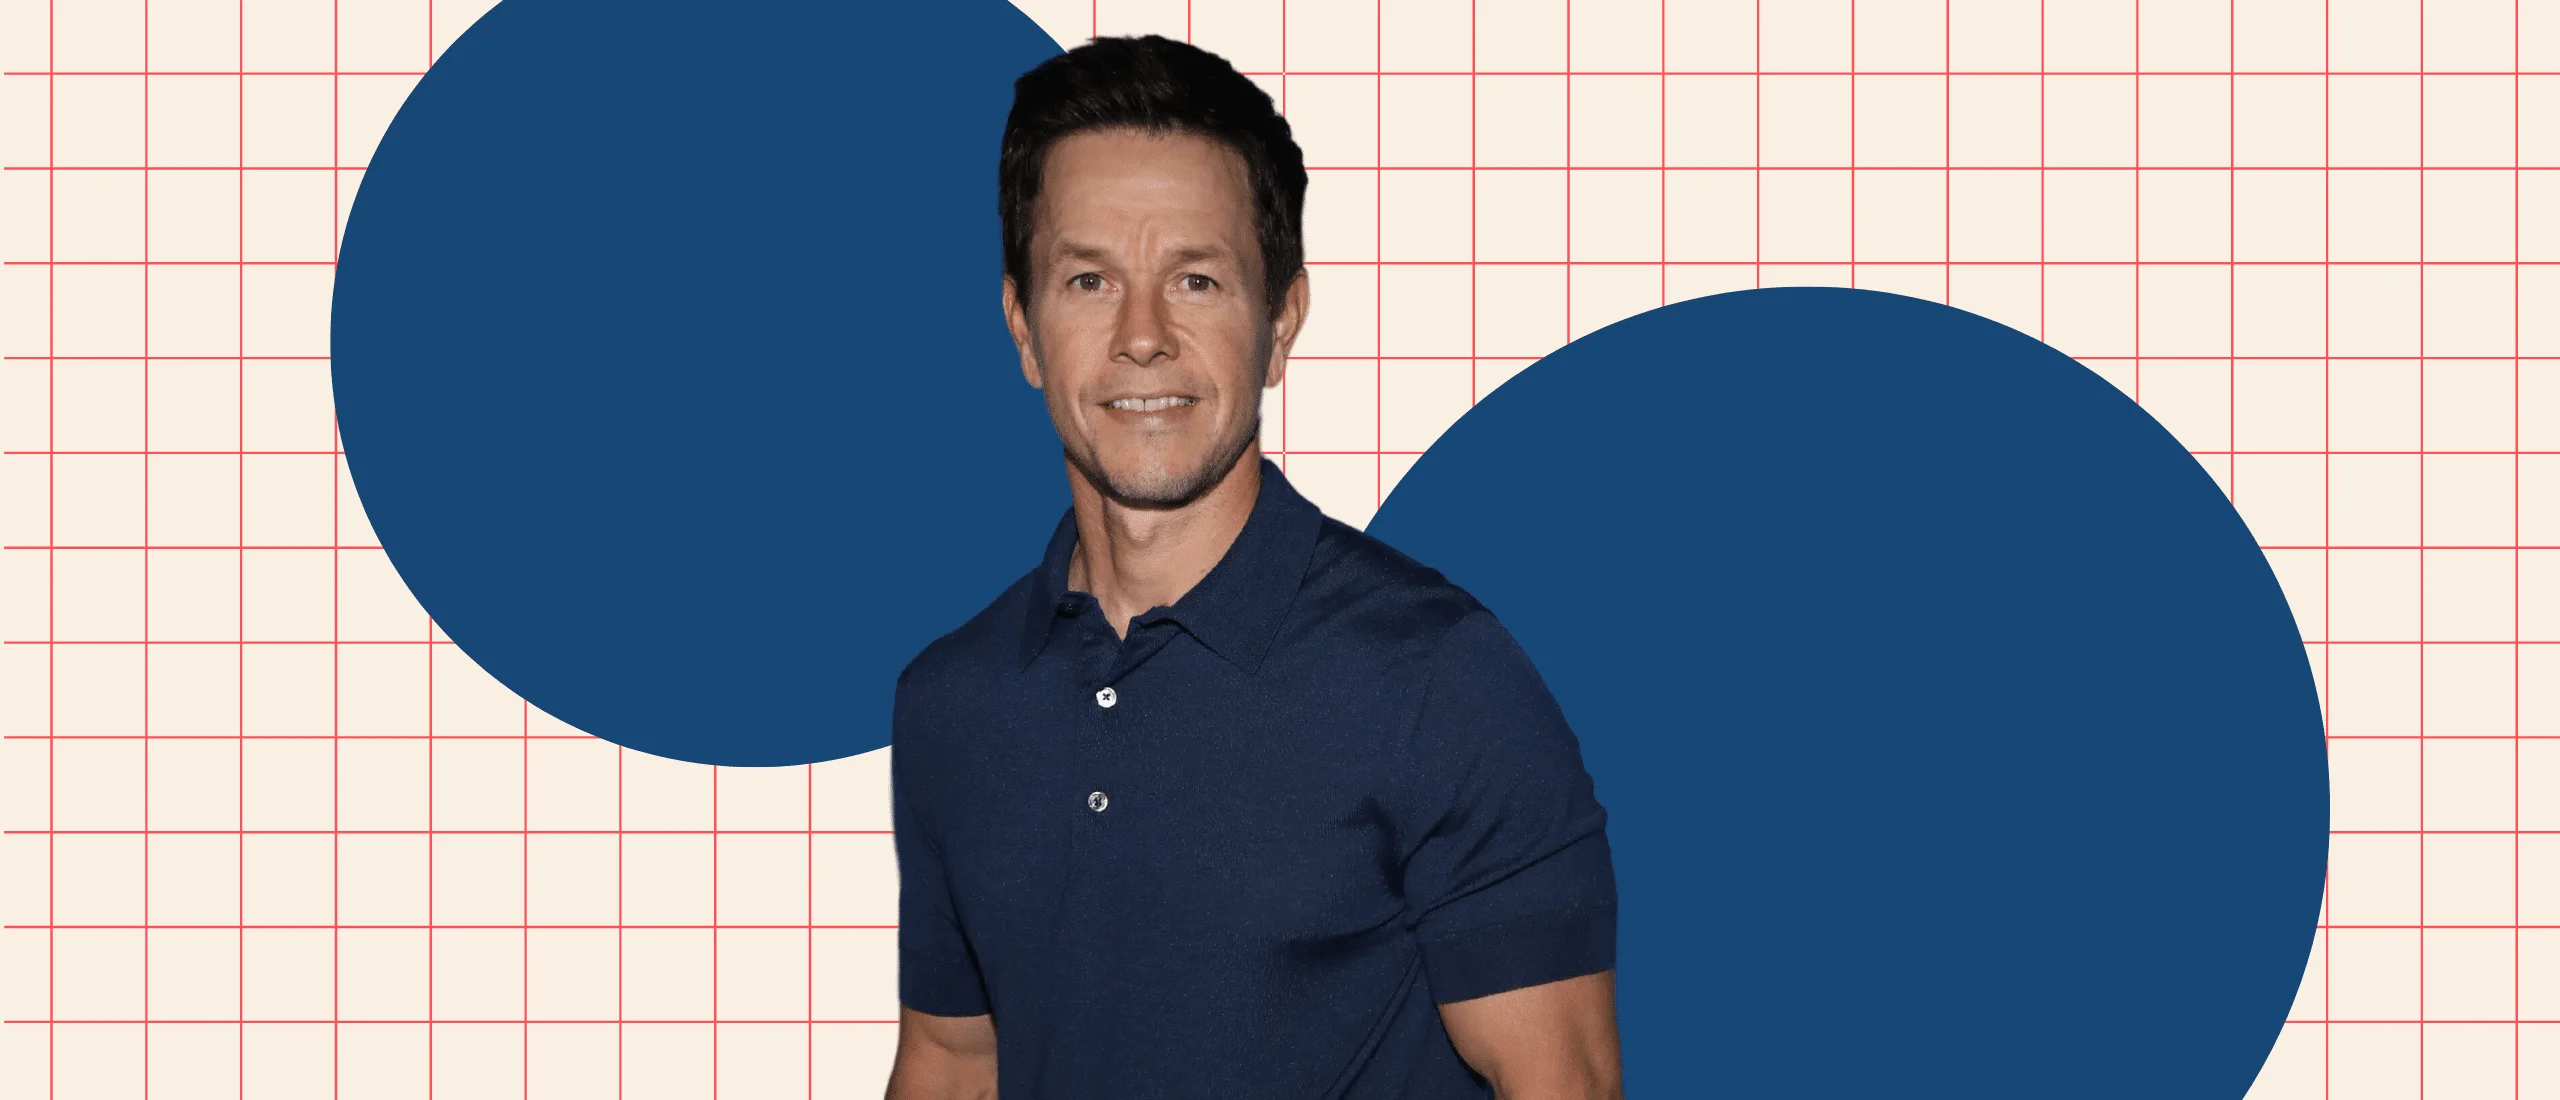 Mark Wahlberg standing in front of beige grid with two large blue circles